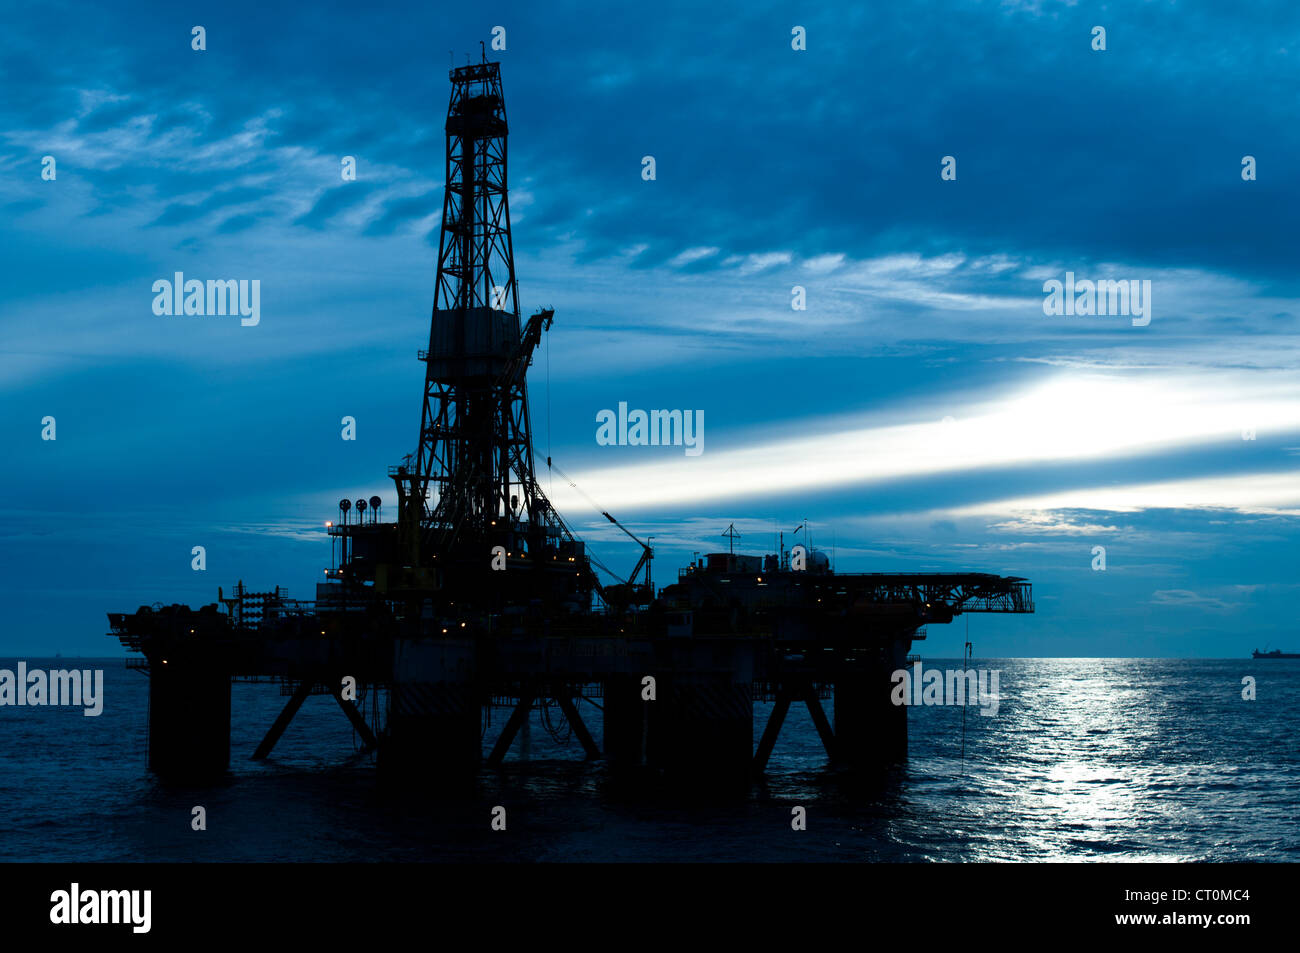 silhouette of an offshore oil drilling rig in low light sunset/sunrise time. Coast of Brazil Stock Photo